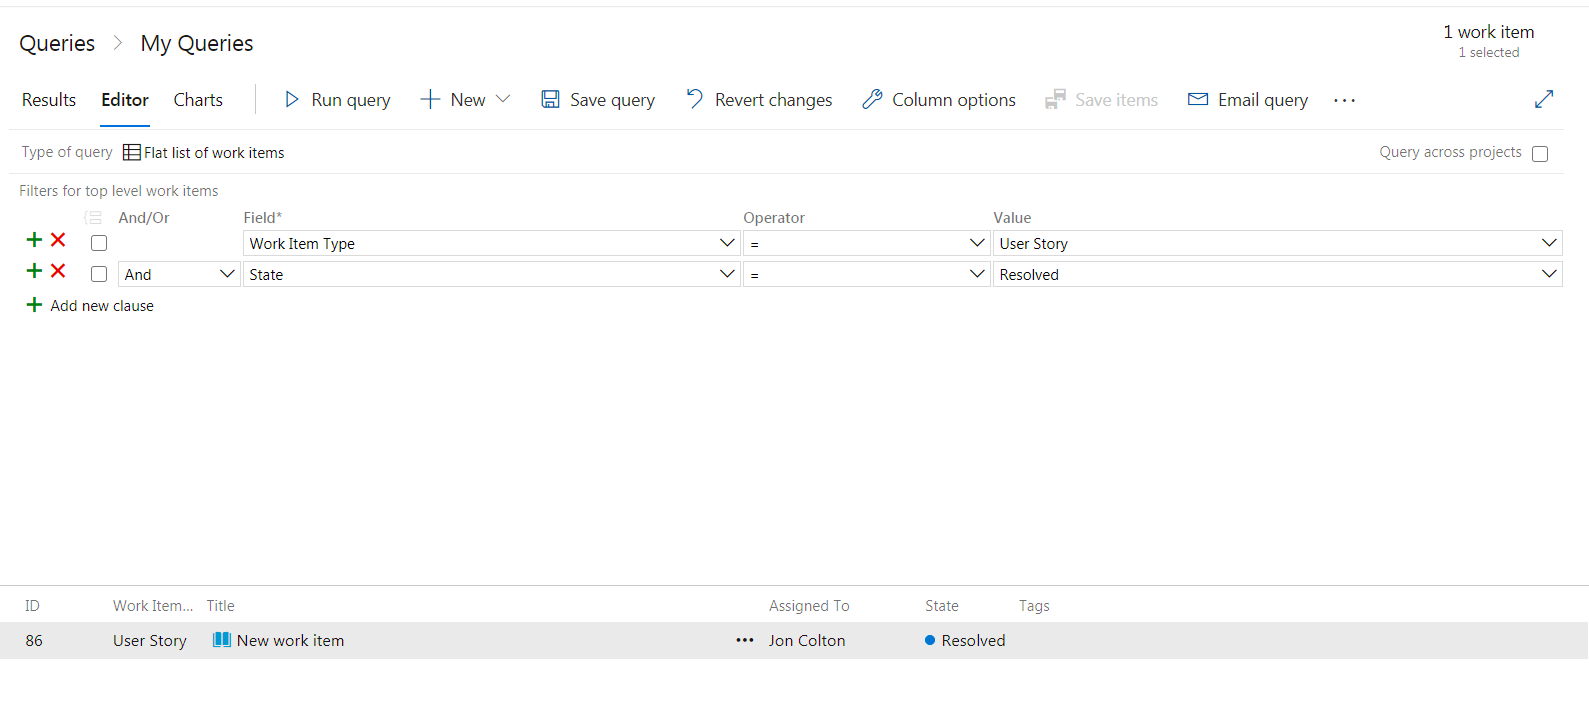 Create a My Query in Azure DevOps with the items you wish to filter.